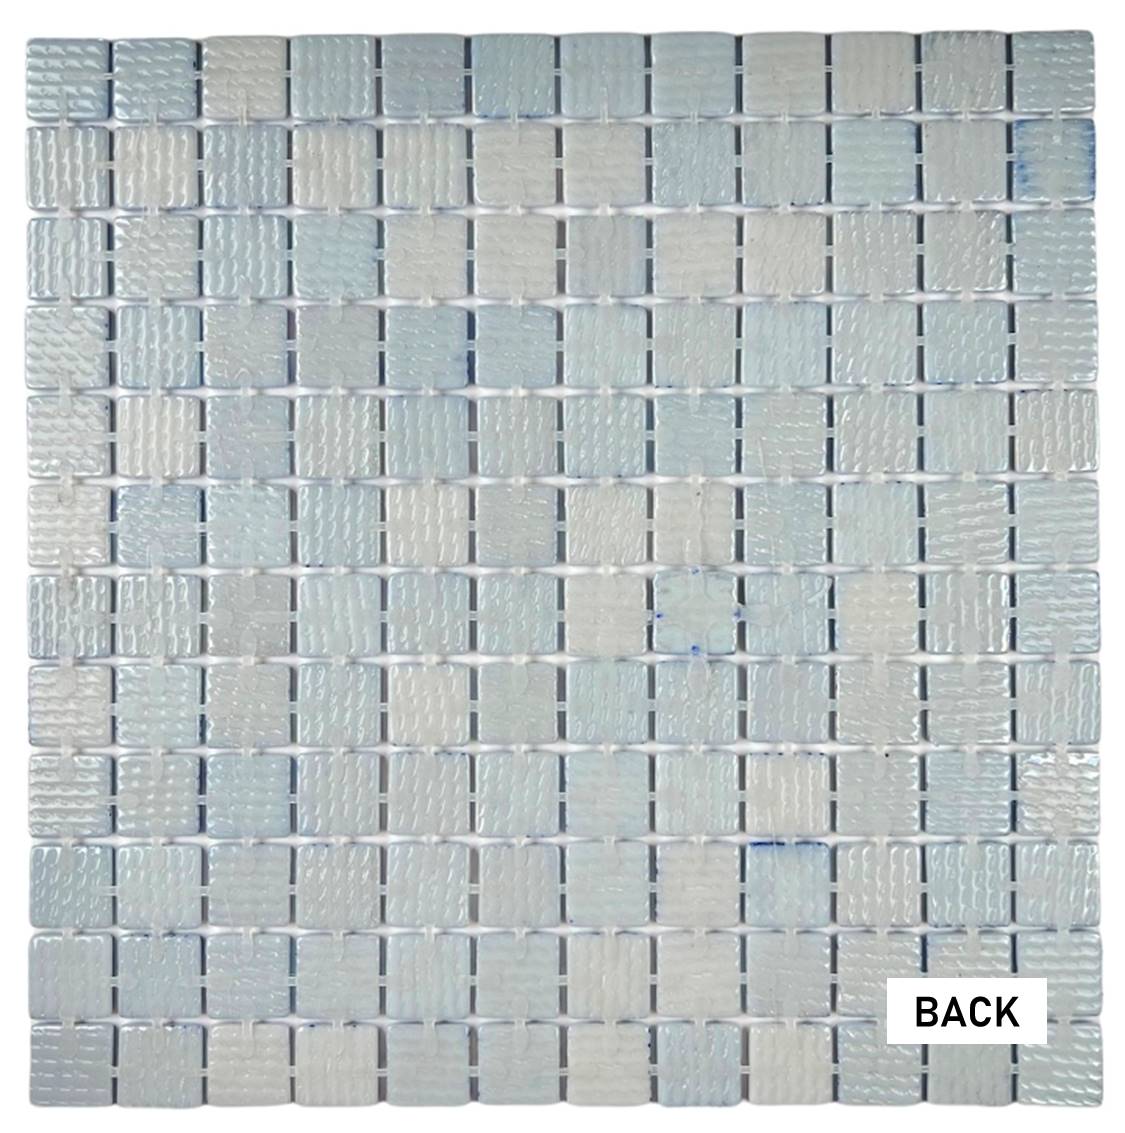 Tenedos Sky Blue Recycled Glass Mosaic Wall Floor Tile Square 7/8 Inch Pattern for Kitchen Backsplash, Swimming Pool Tile, Bathroom Wall, Accent Wall